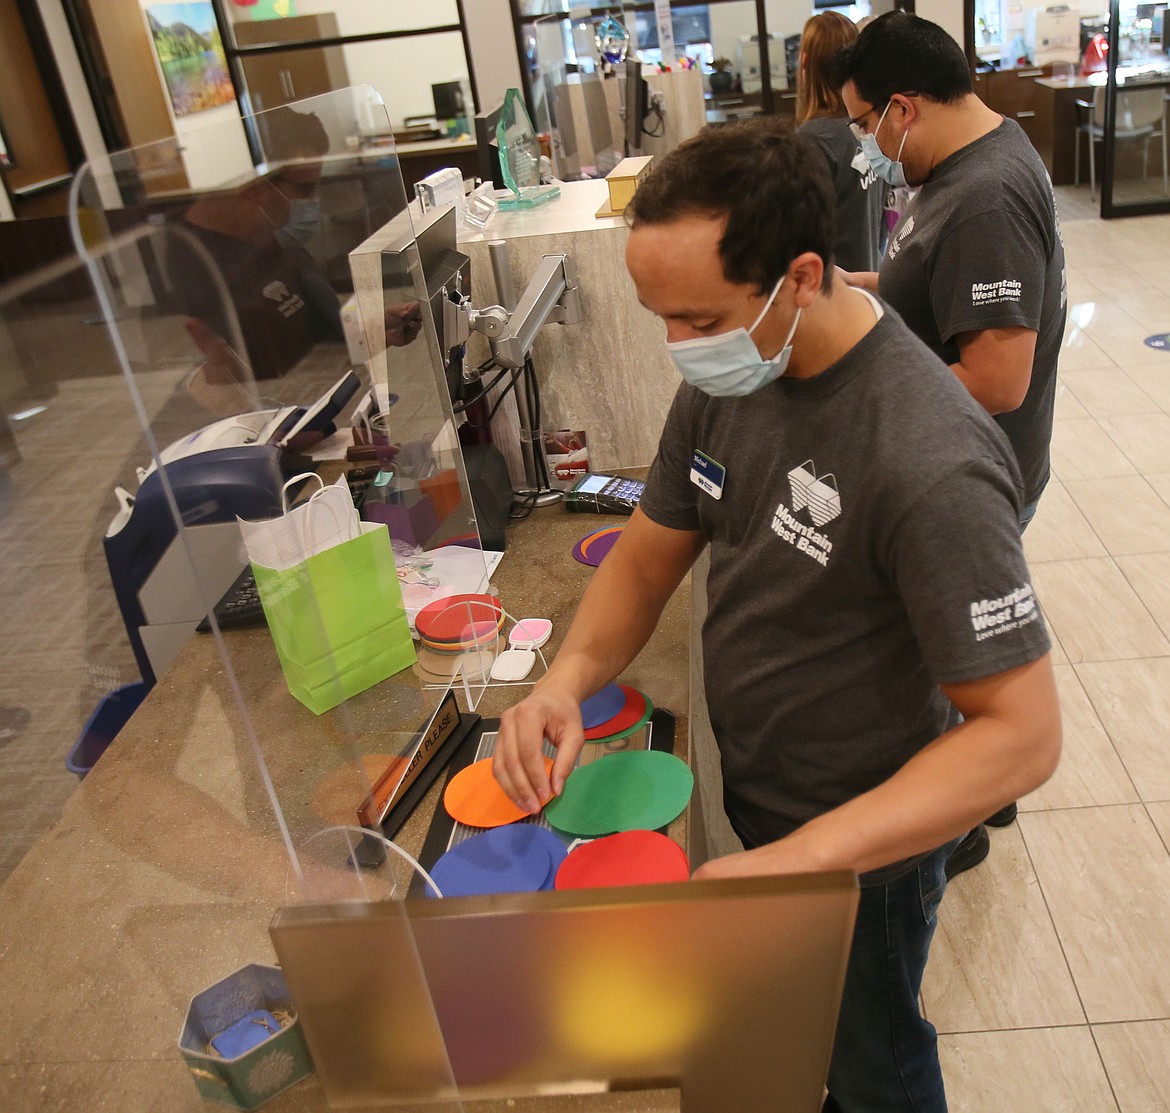 Mountain West Bank teller Michael Myatt on Tuesday morning prepares discs of colorful tissue paper to be delivered in project bags to Early Head Start as part of United Way's annual Day of Caring.